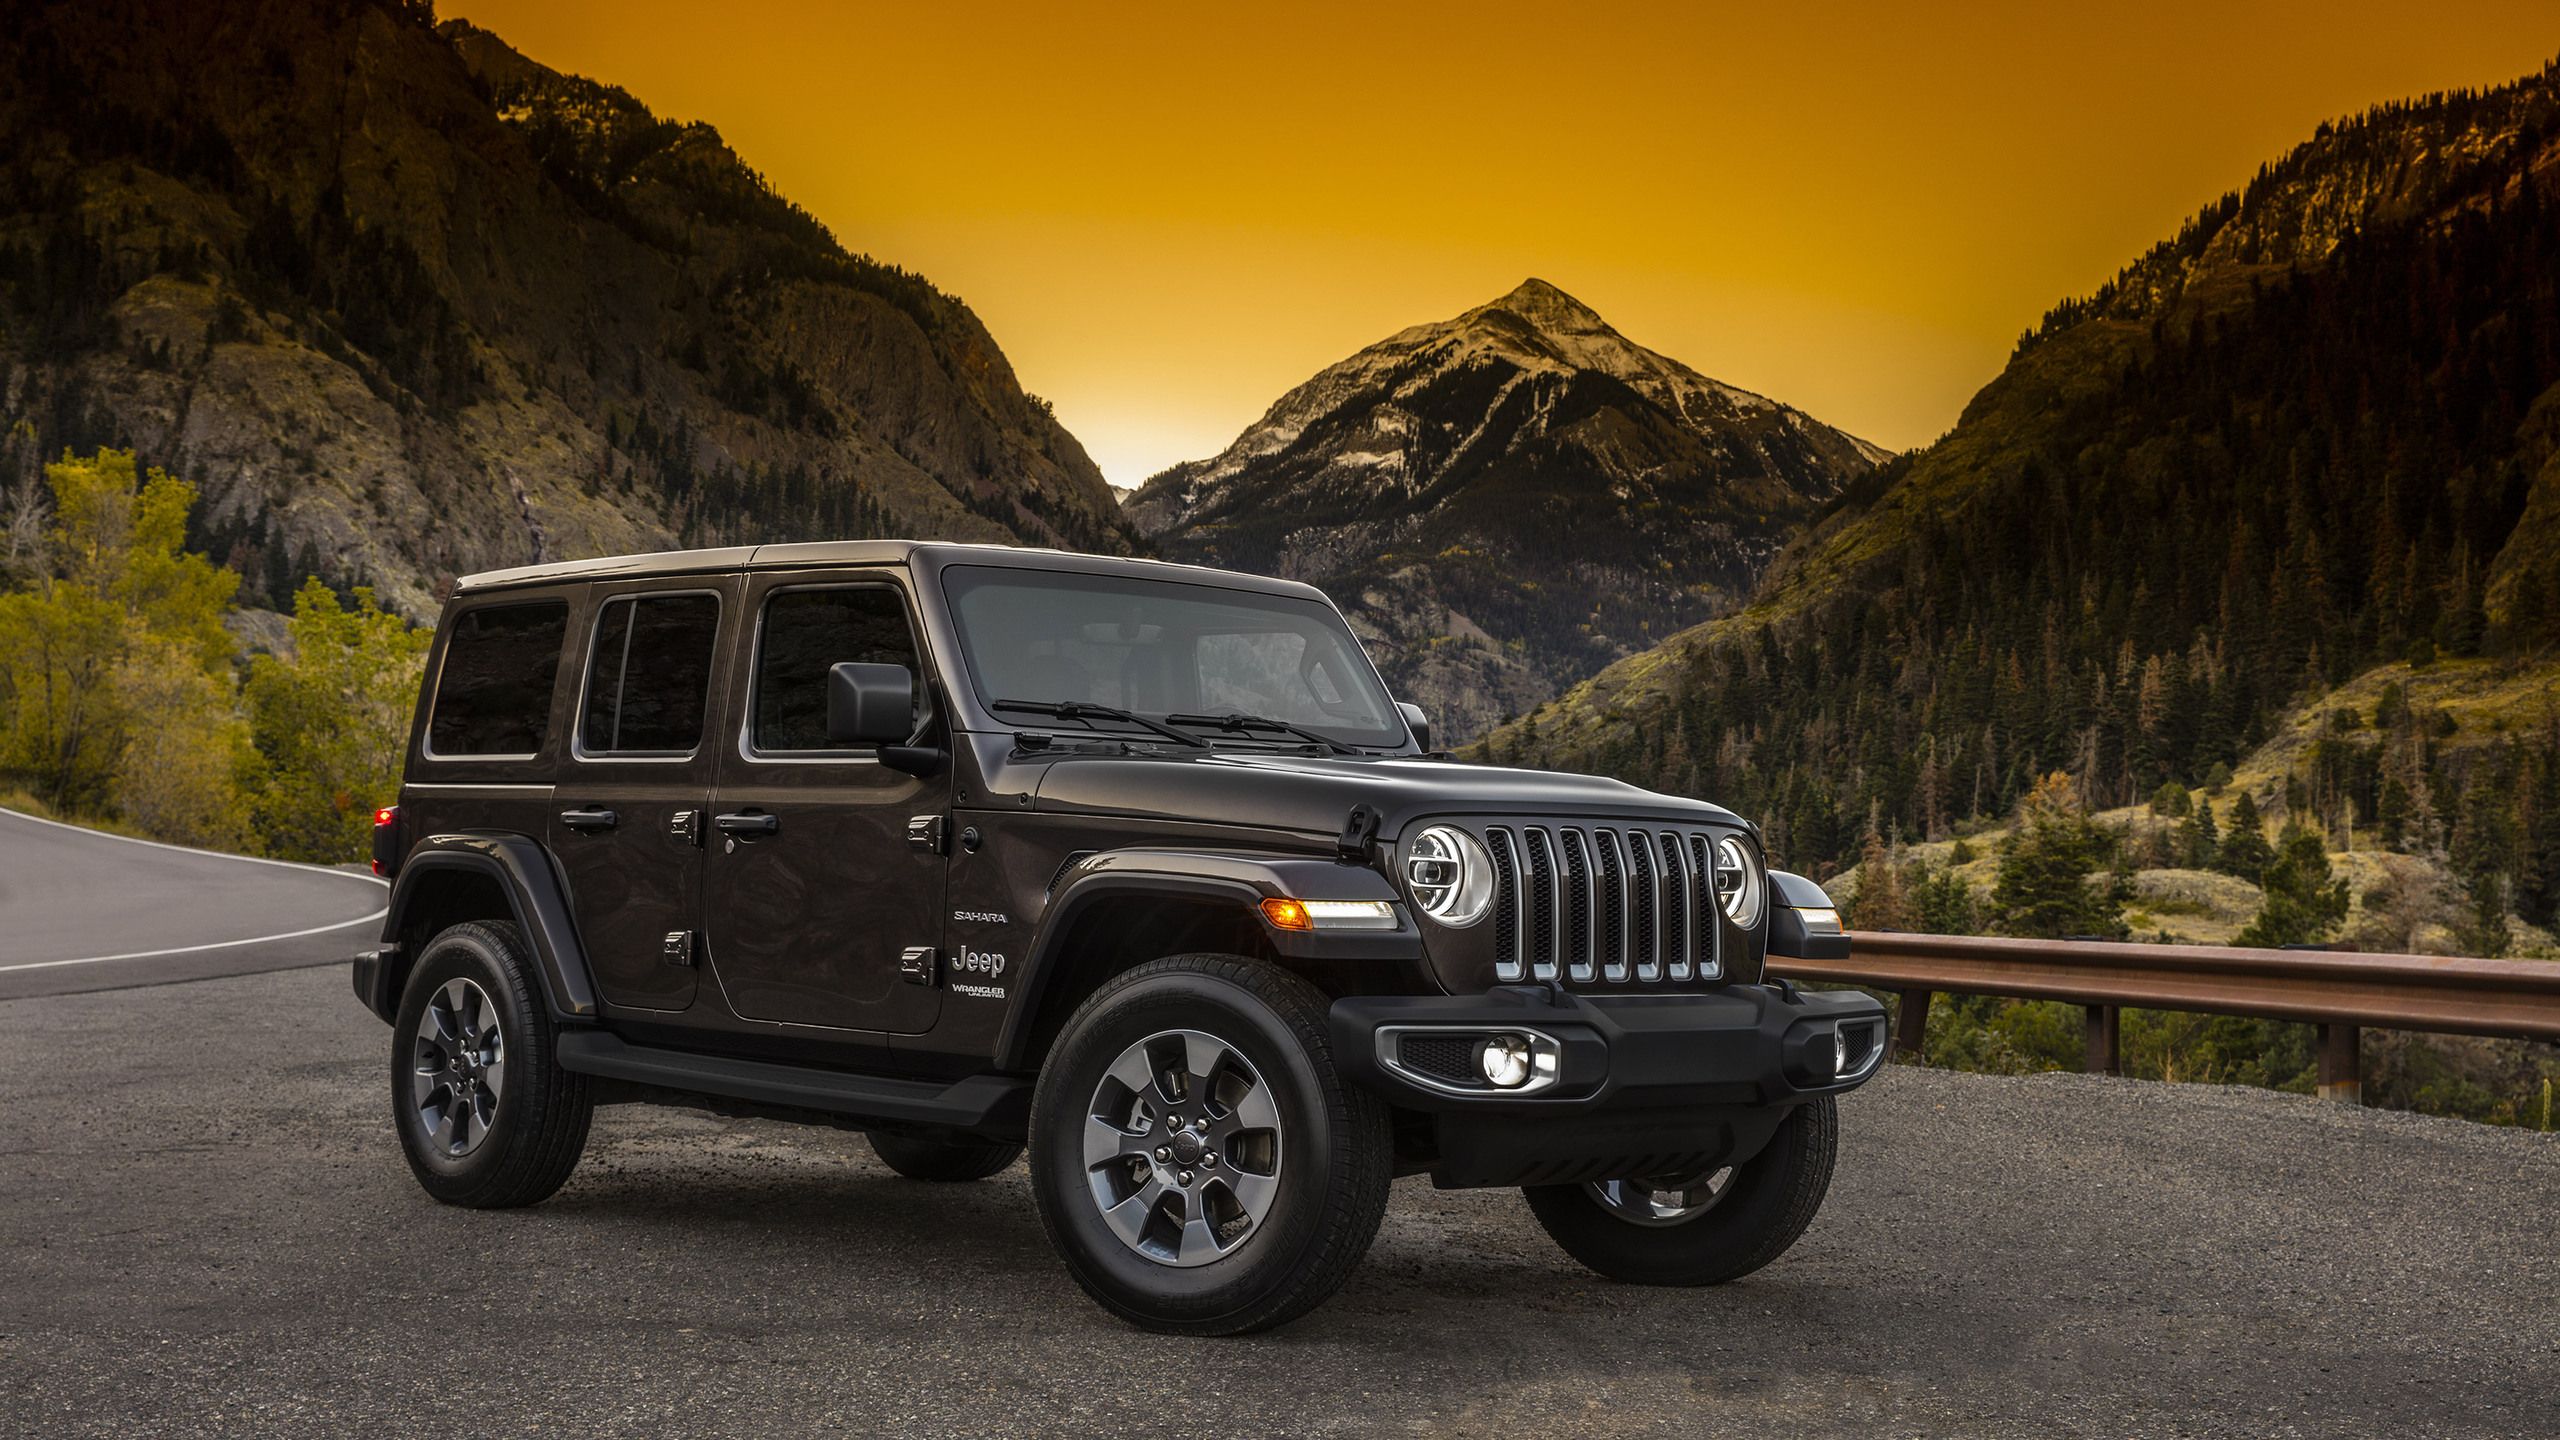 Jeep Wrangler Unlimited Rubicon 1440P Resolution HD 4k Wallpaper, Image, Background, Photo and Picture